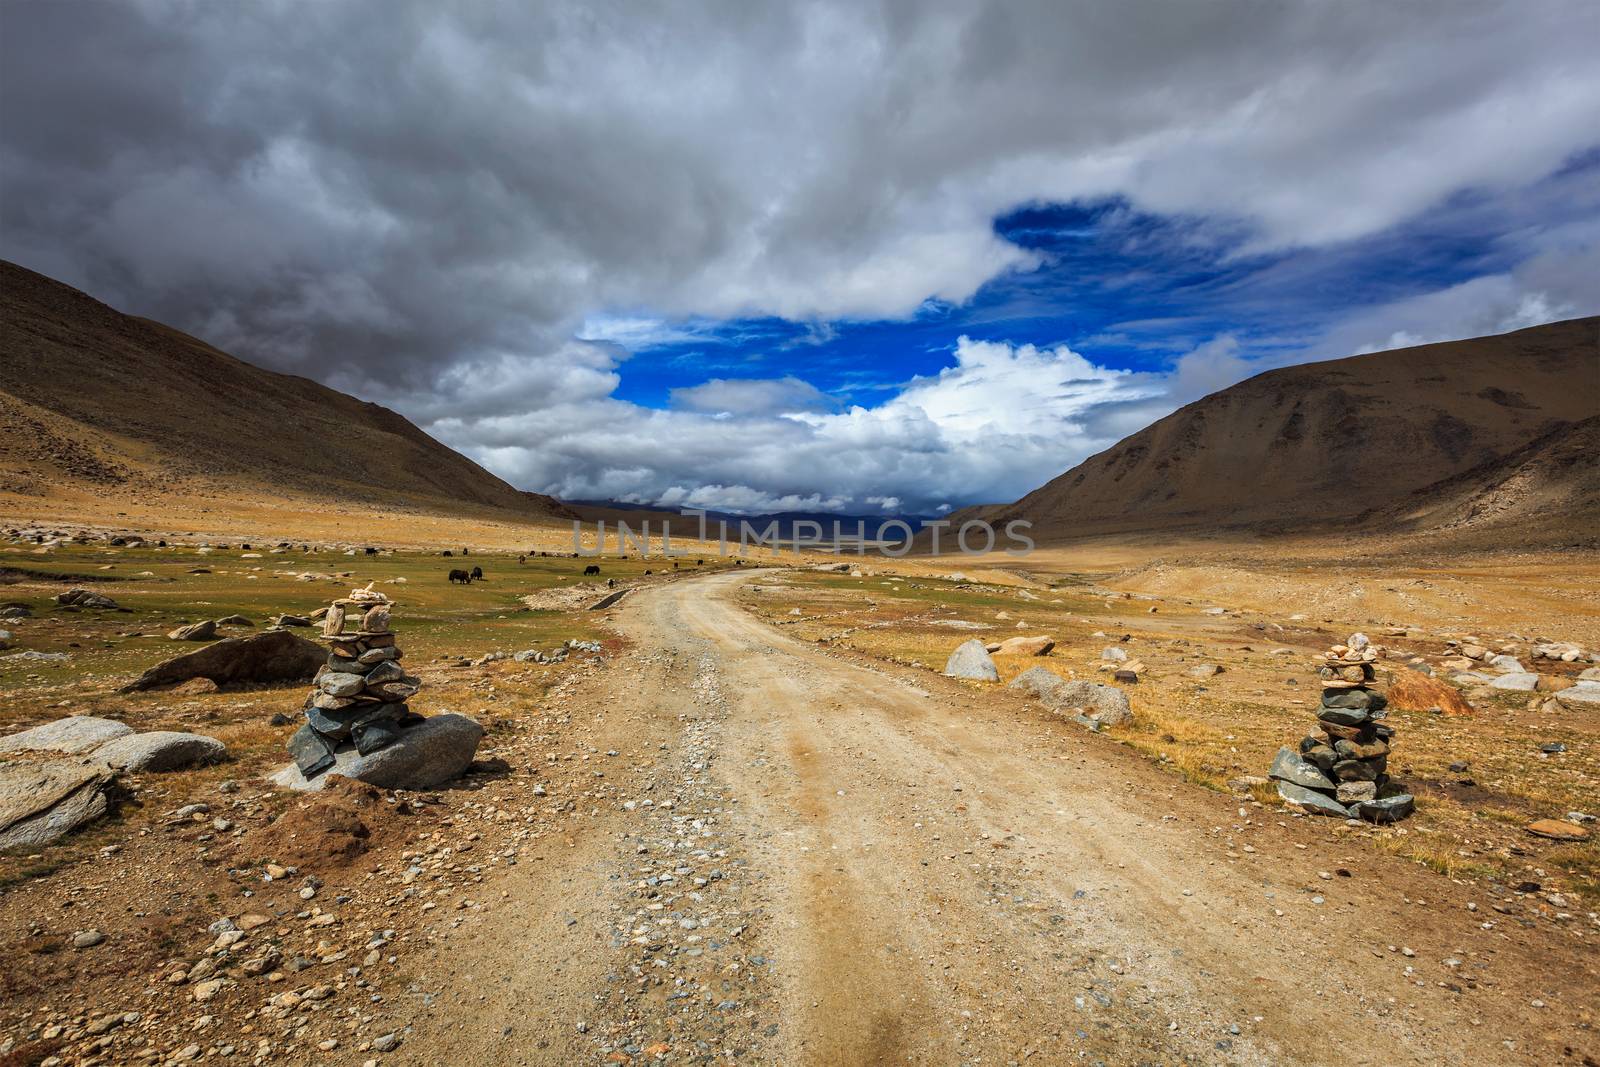 Road in Himalayas, India by dimol